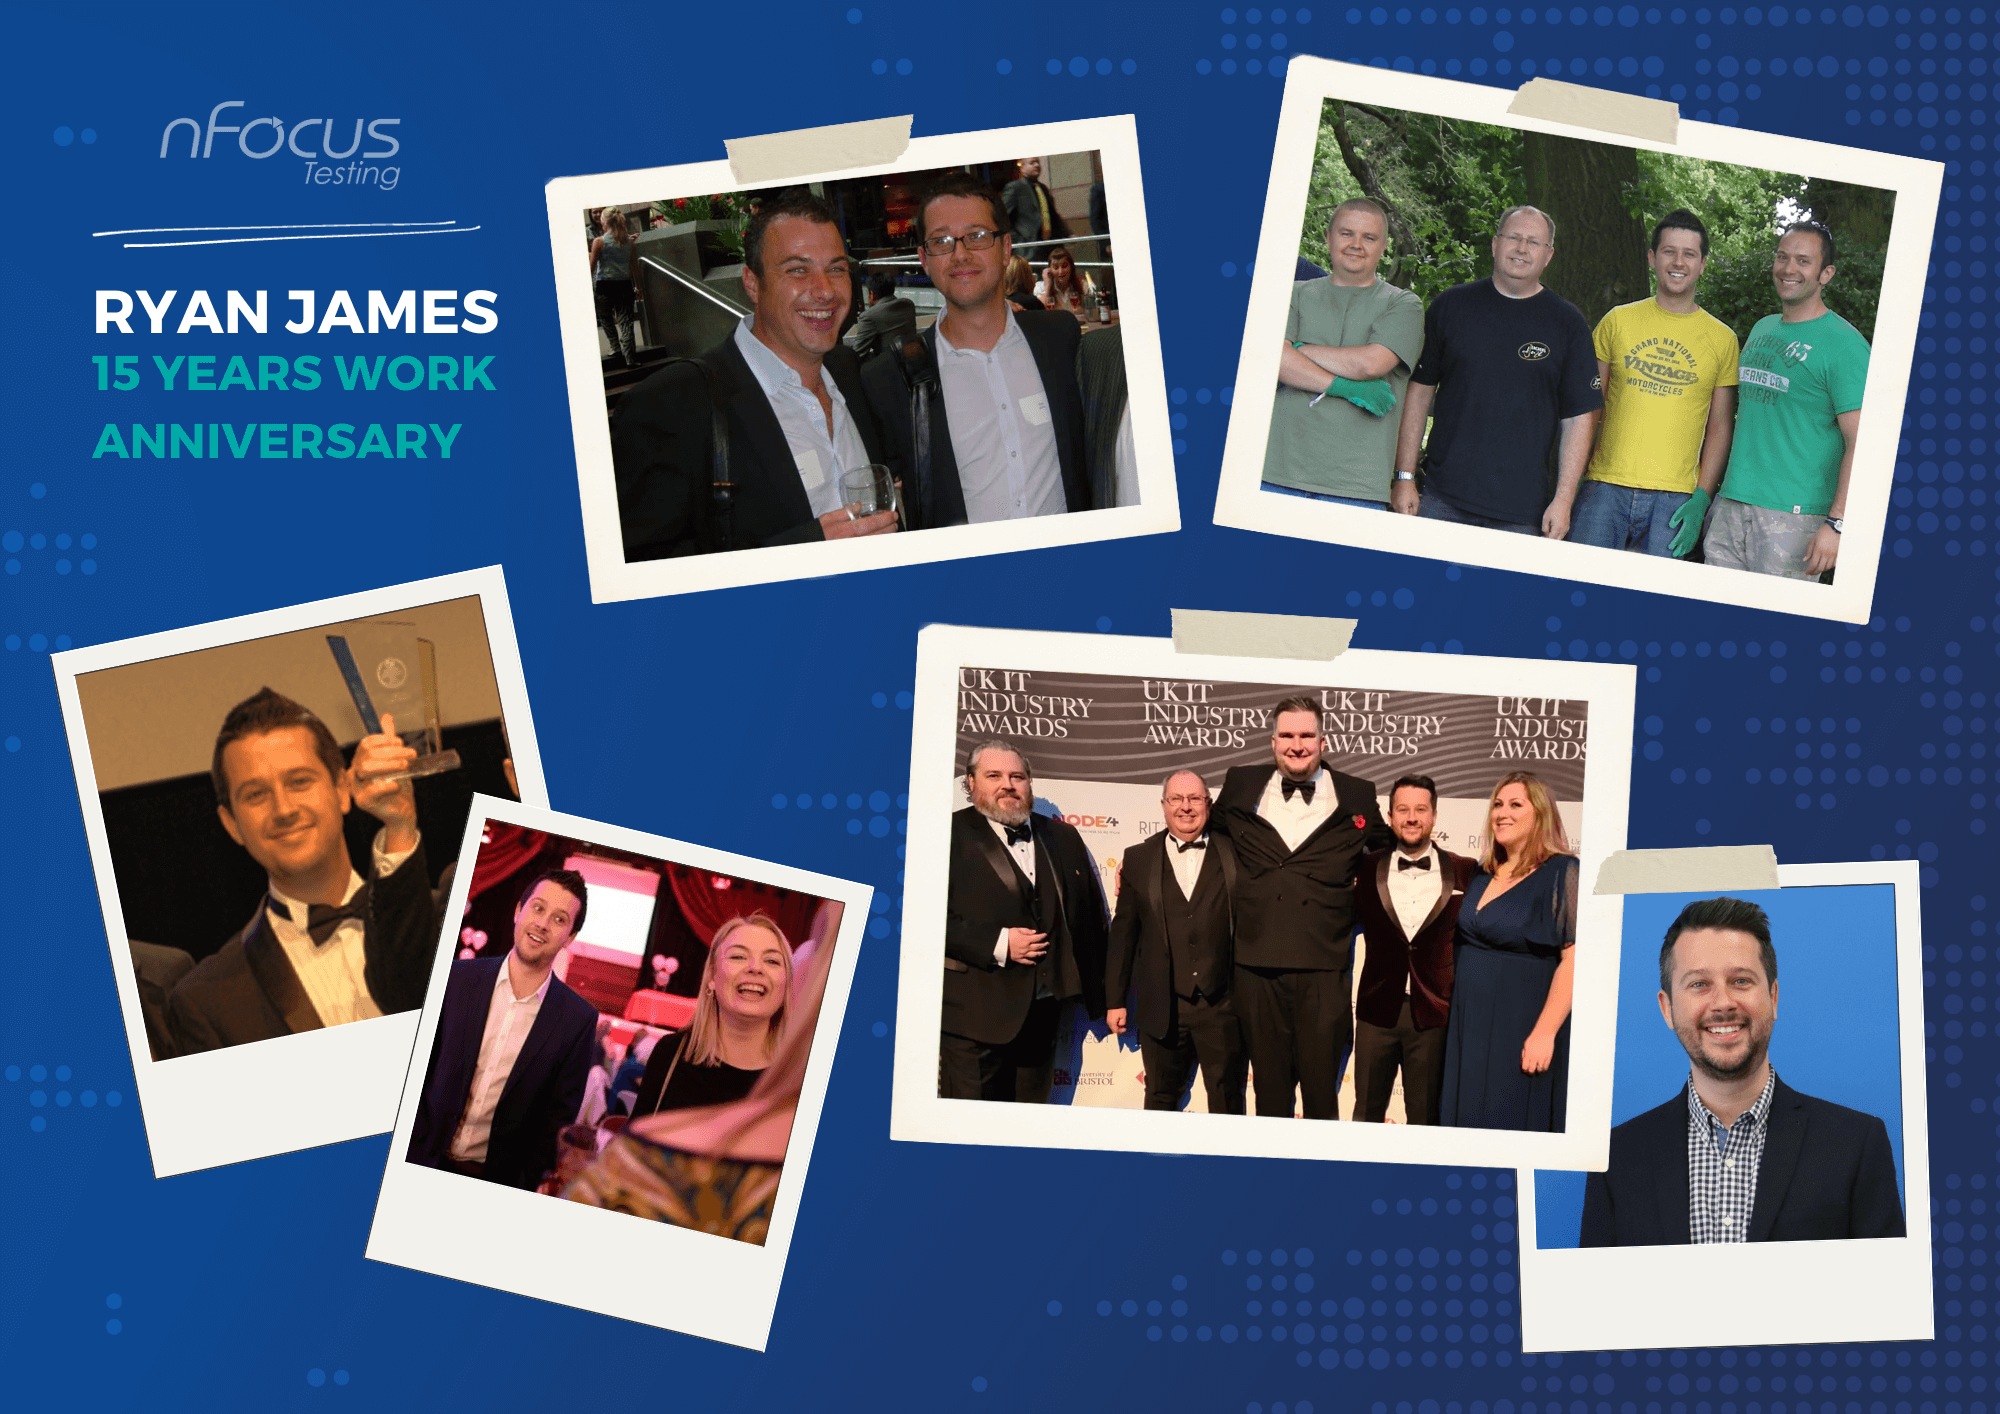 nFocus' MD, Ryan James 15th Anniversary Photos Over The Years